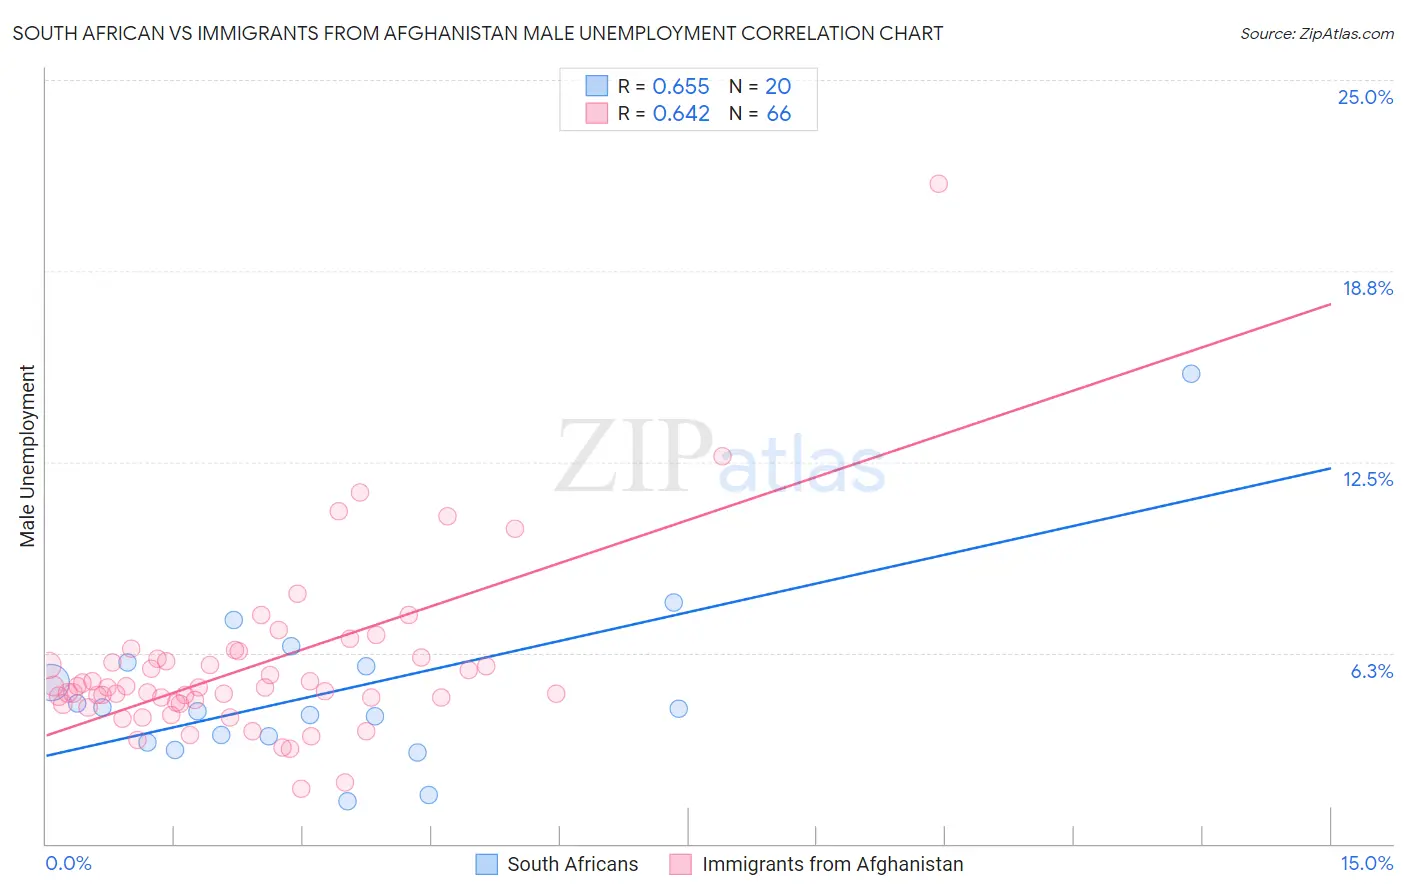 South African vs Immigrants from Afghanistan Male Unemployment